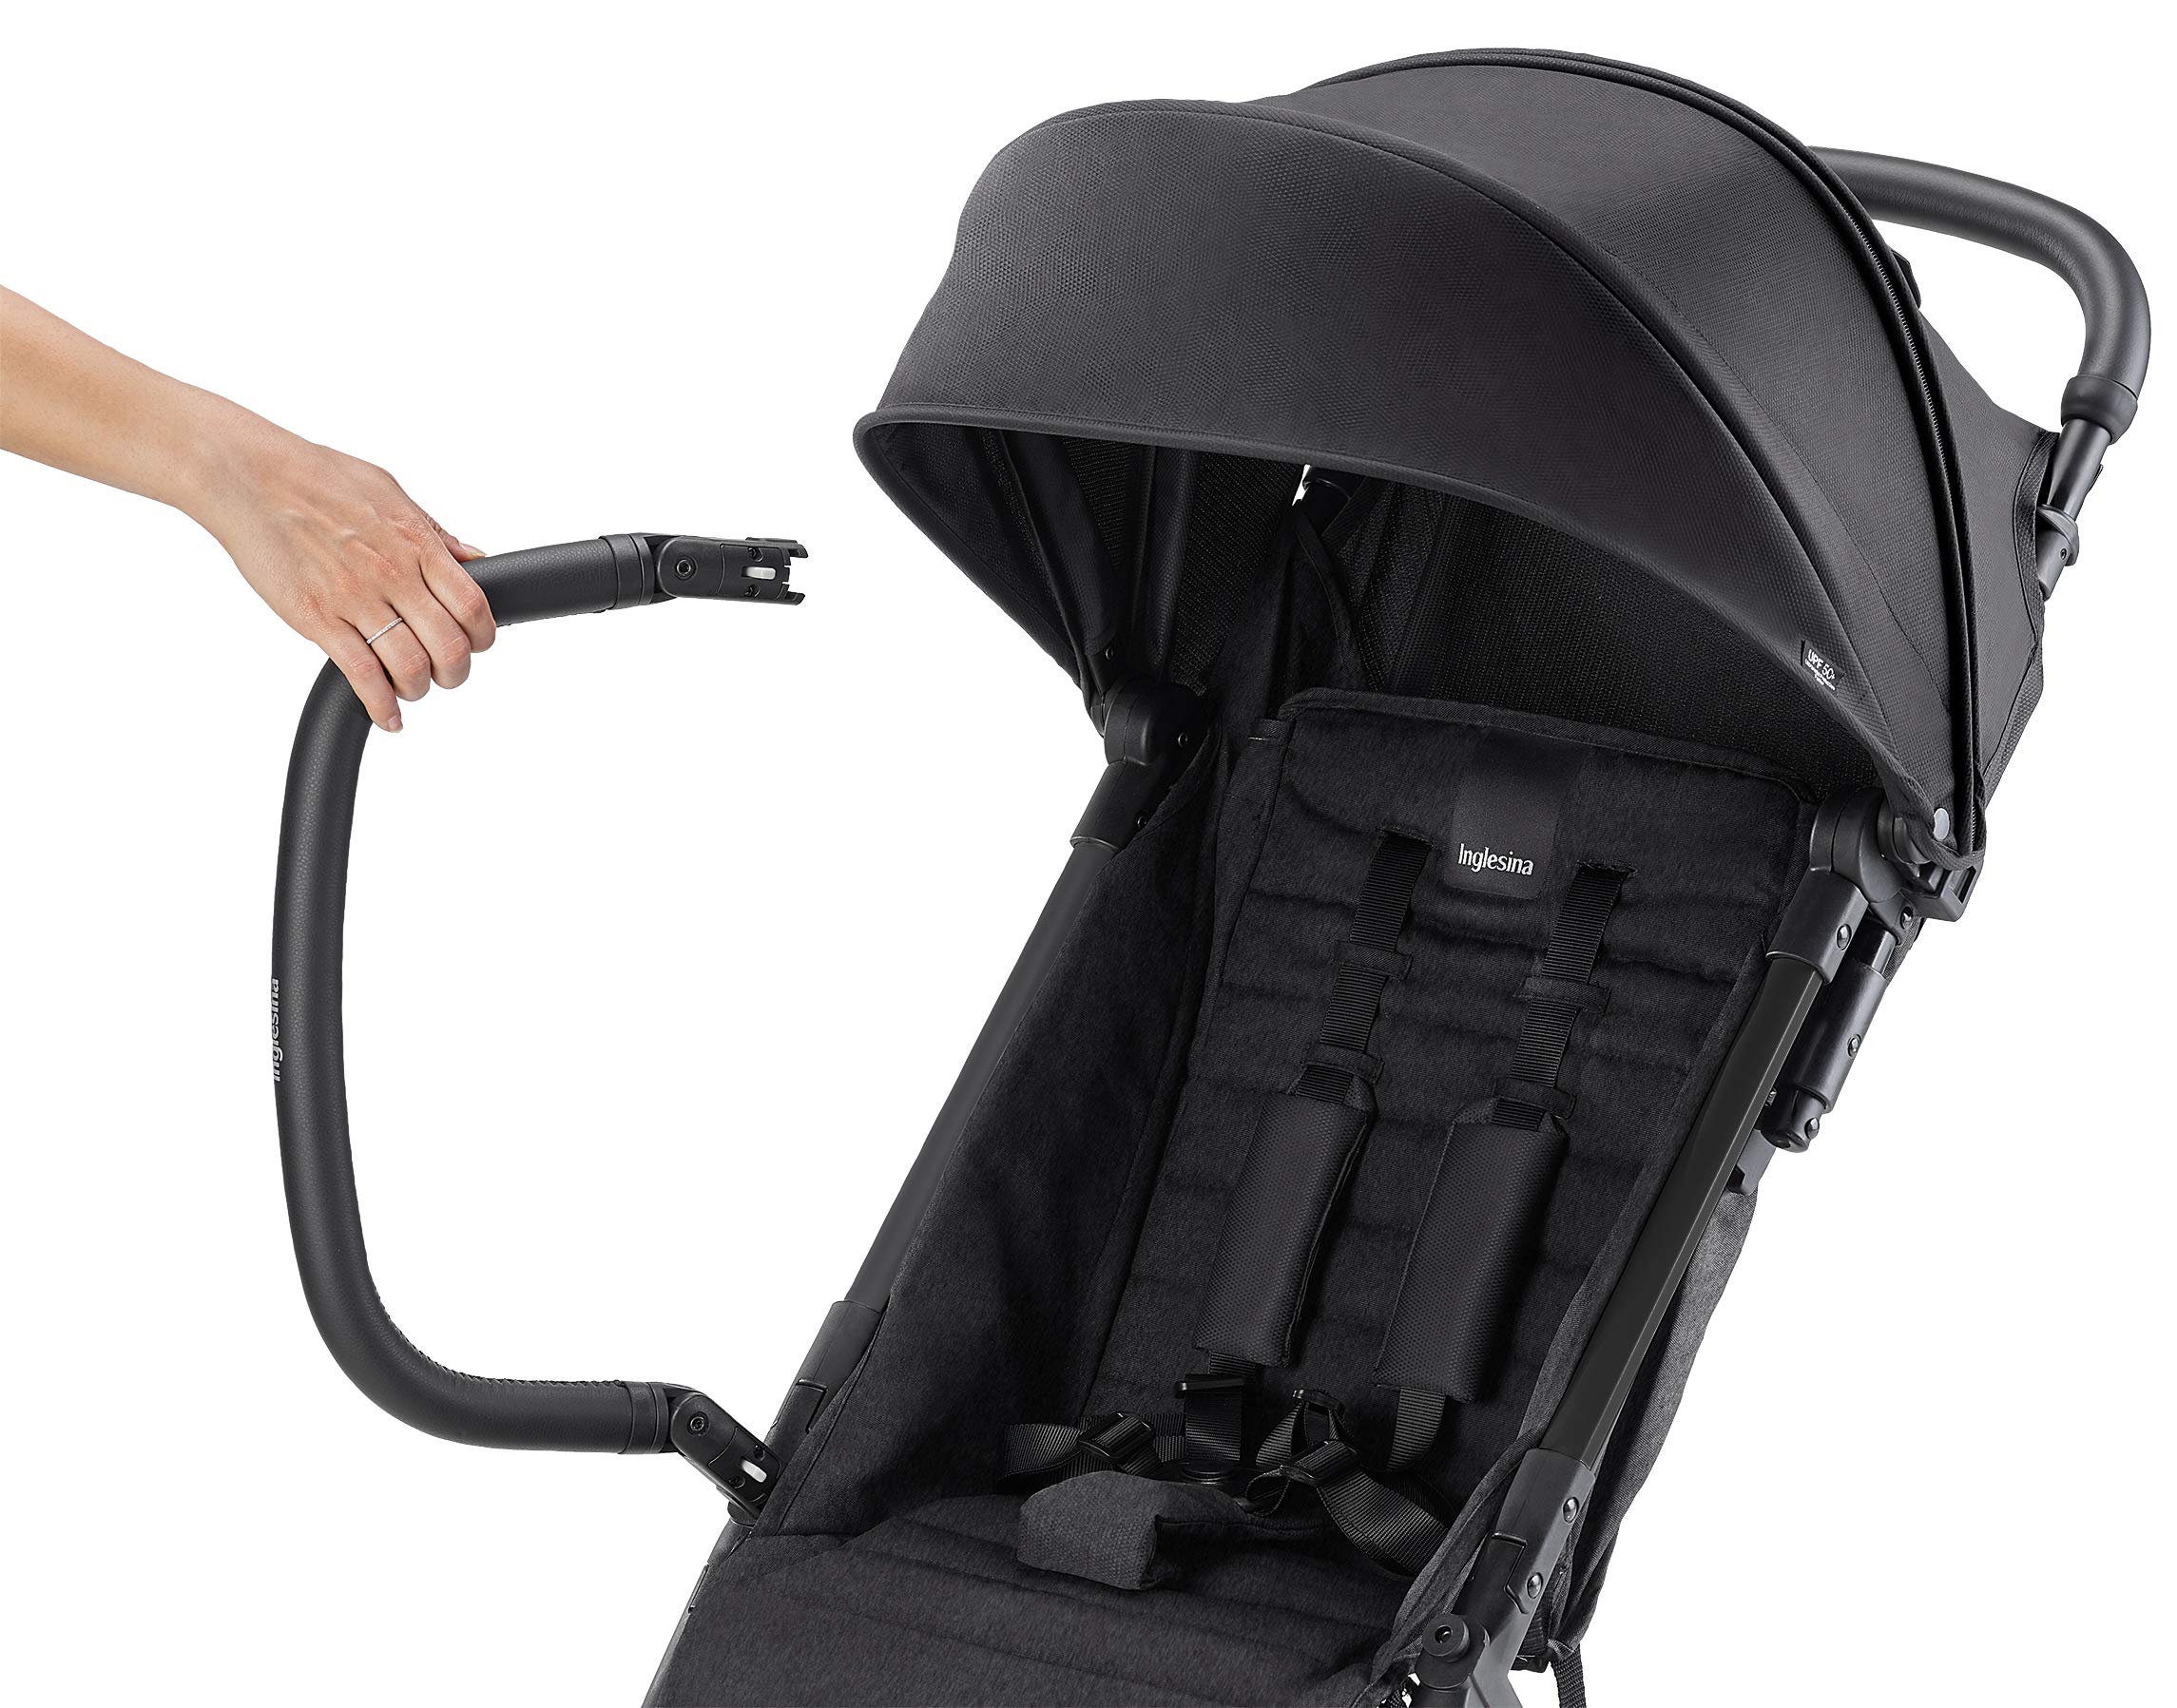 Inglesina Quid Baby Stroller - Lightweight at 13 lbs, Travel-Friendly, Ultra-Compact & Folding - Fits in Airplane Cabin & Overhead - for Toddlers from 3 Months to 50 lbs - Large Canopy, Stormy Gray